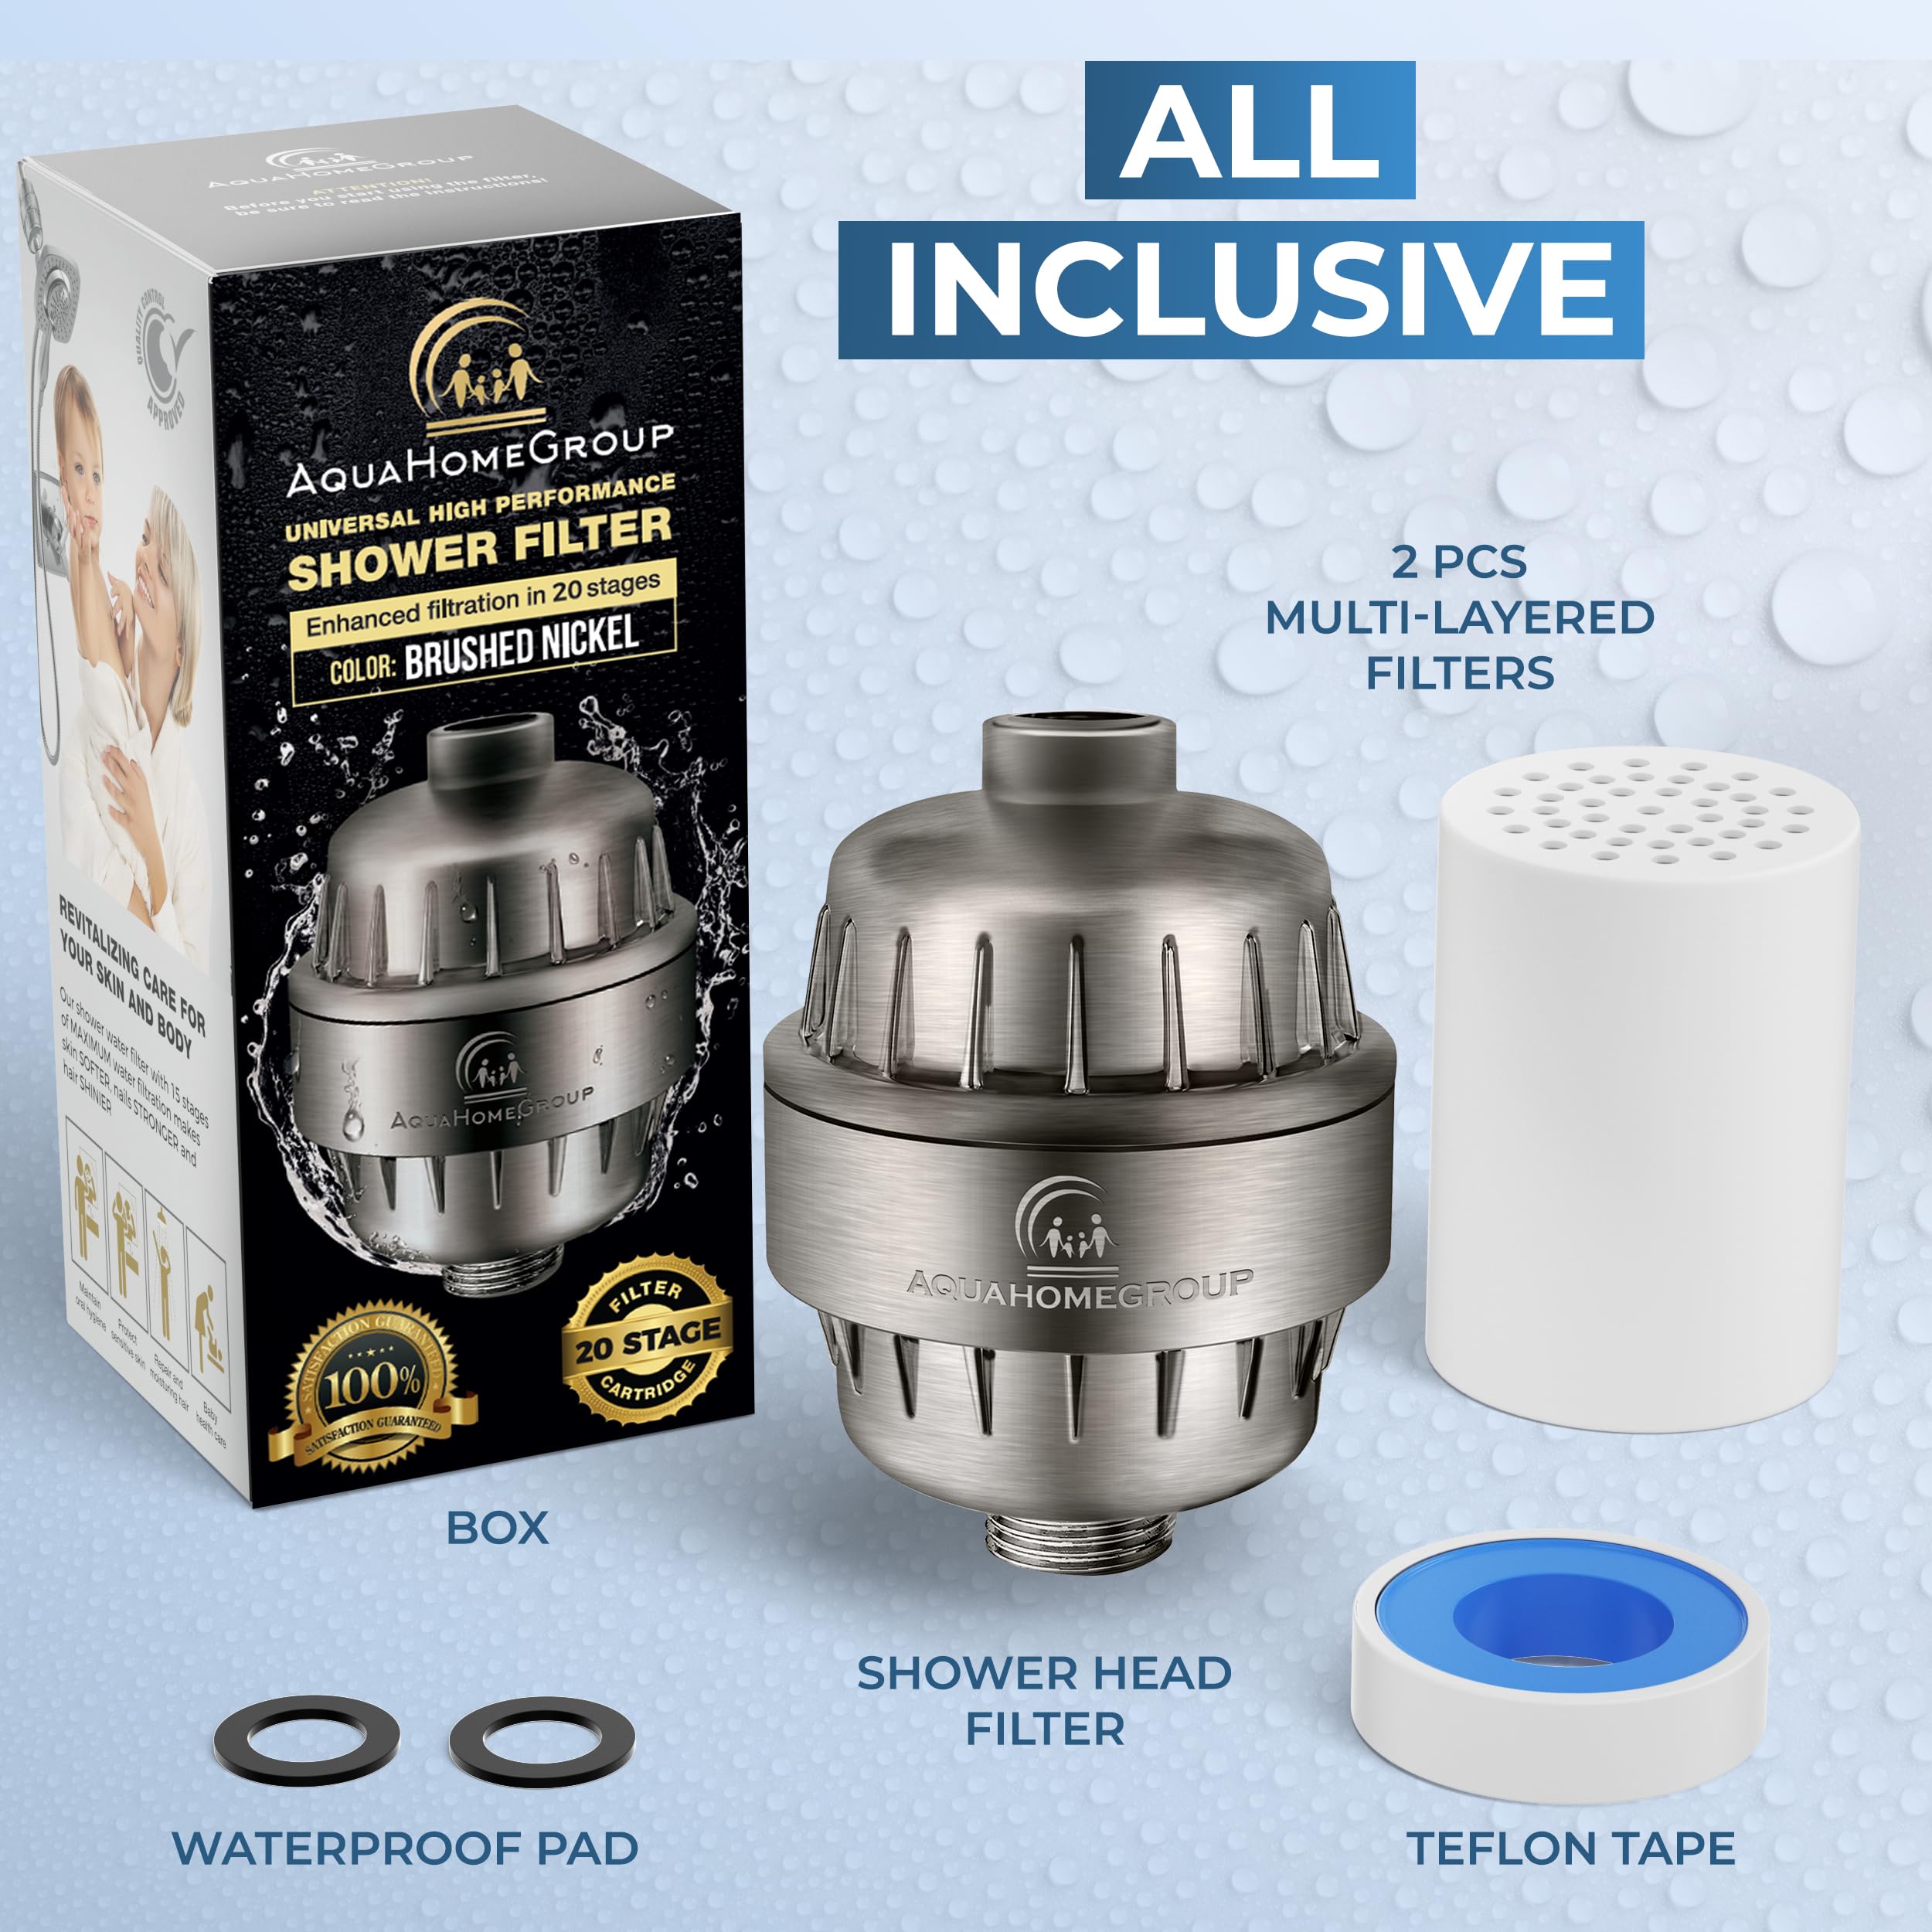 AquaHomeGroup 20 Stage Shower Filter with Vitamin C E for Hard Water - High Output Shower Water Filter to Remove Chlorine and Fluoride - 2 Cartridges Included -Consistent Water Flow Showerhead Filter